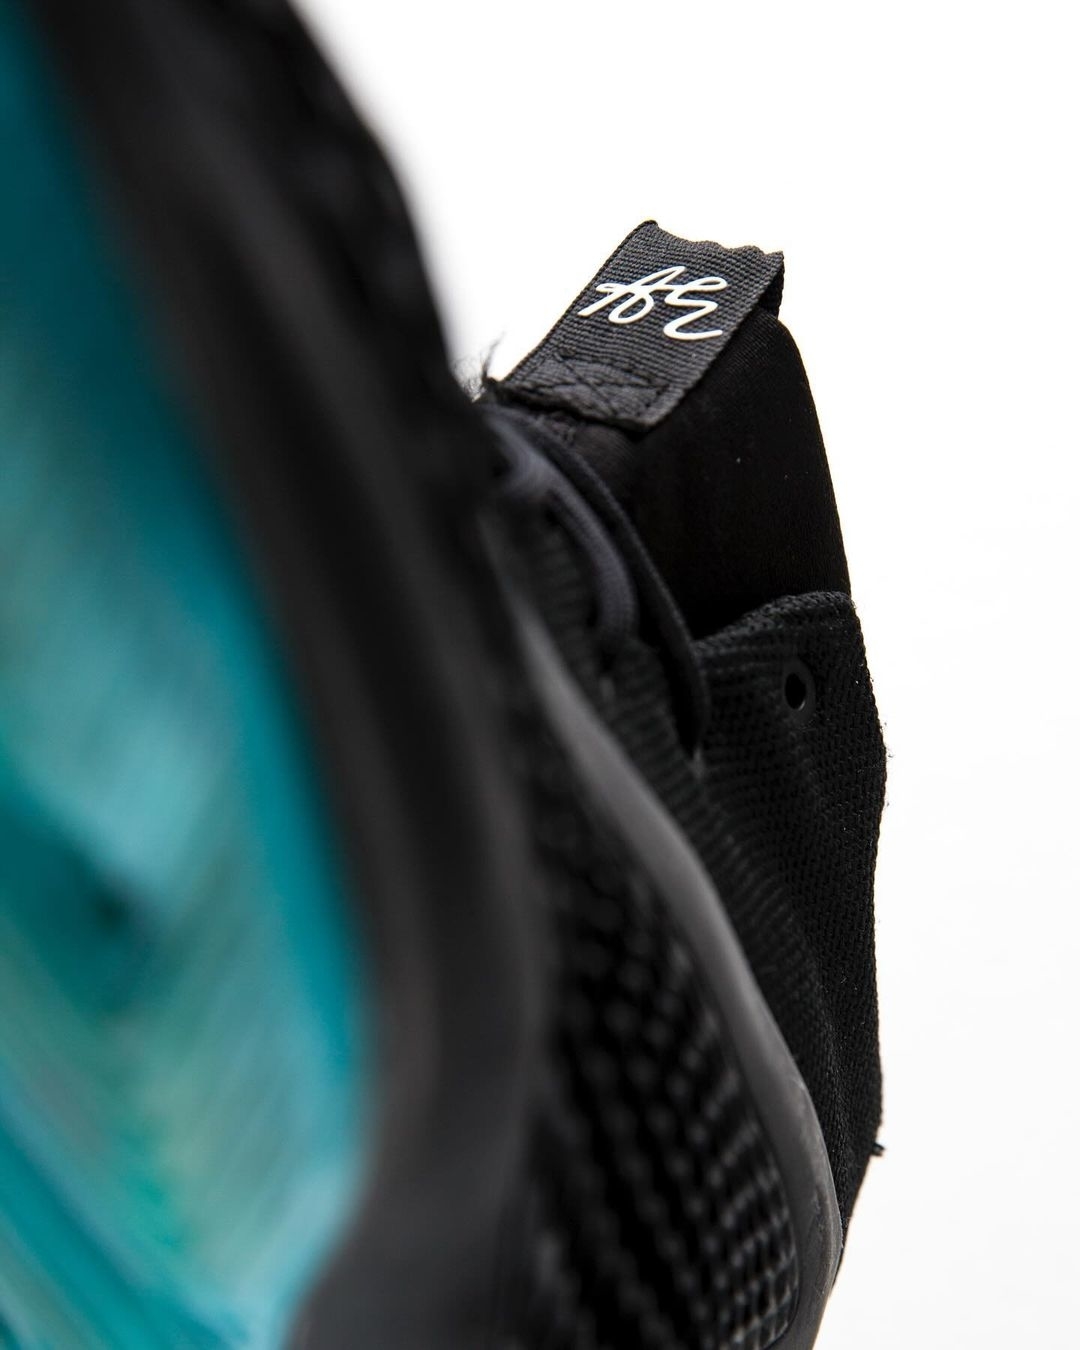 Close-up view of a black sneaker, focusing on the heel area with visible blue sole detail and a tag with a white logo